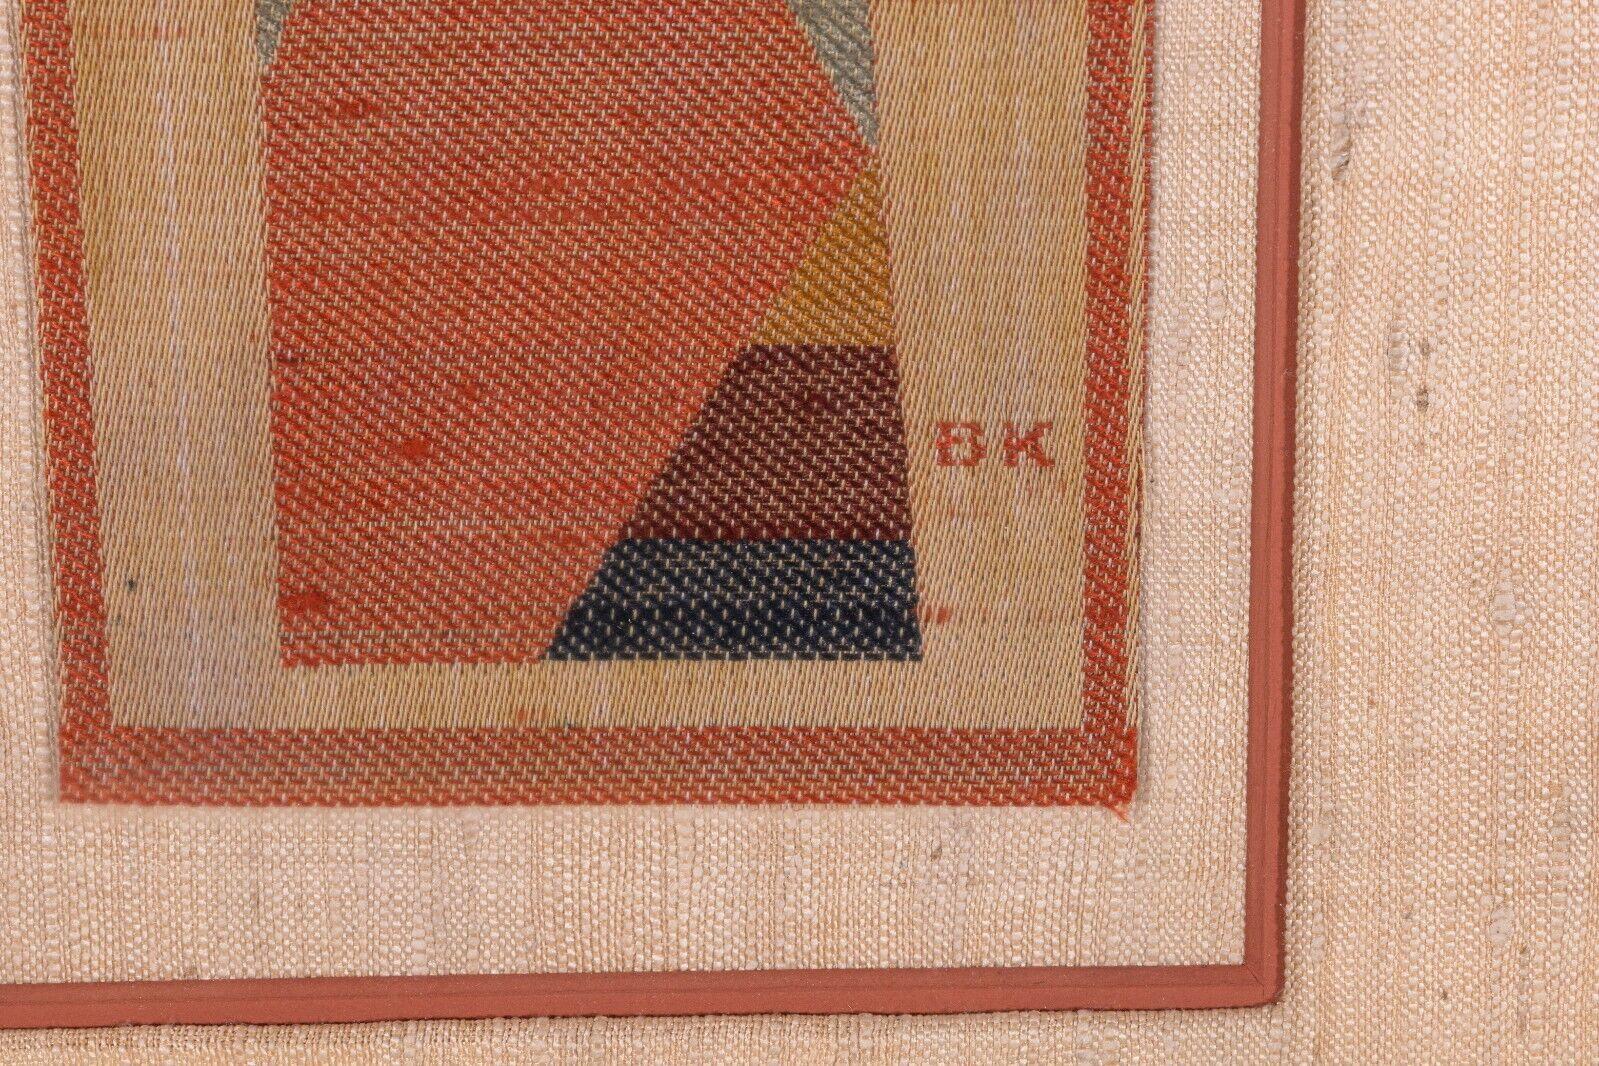 Boris Kroll Mid-Century Modern Woven Fabric Monogram Bk Signed Verso Framed 1965 In Good Condition For Sale In Keego Harbor, MI